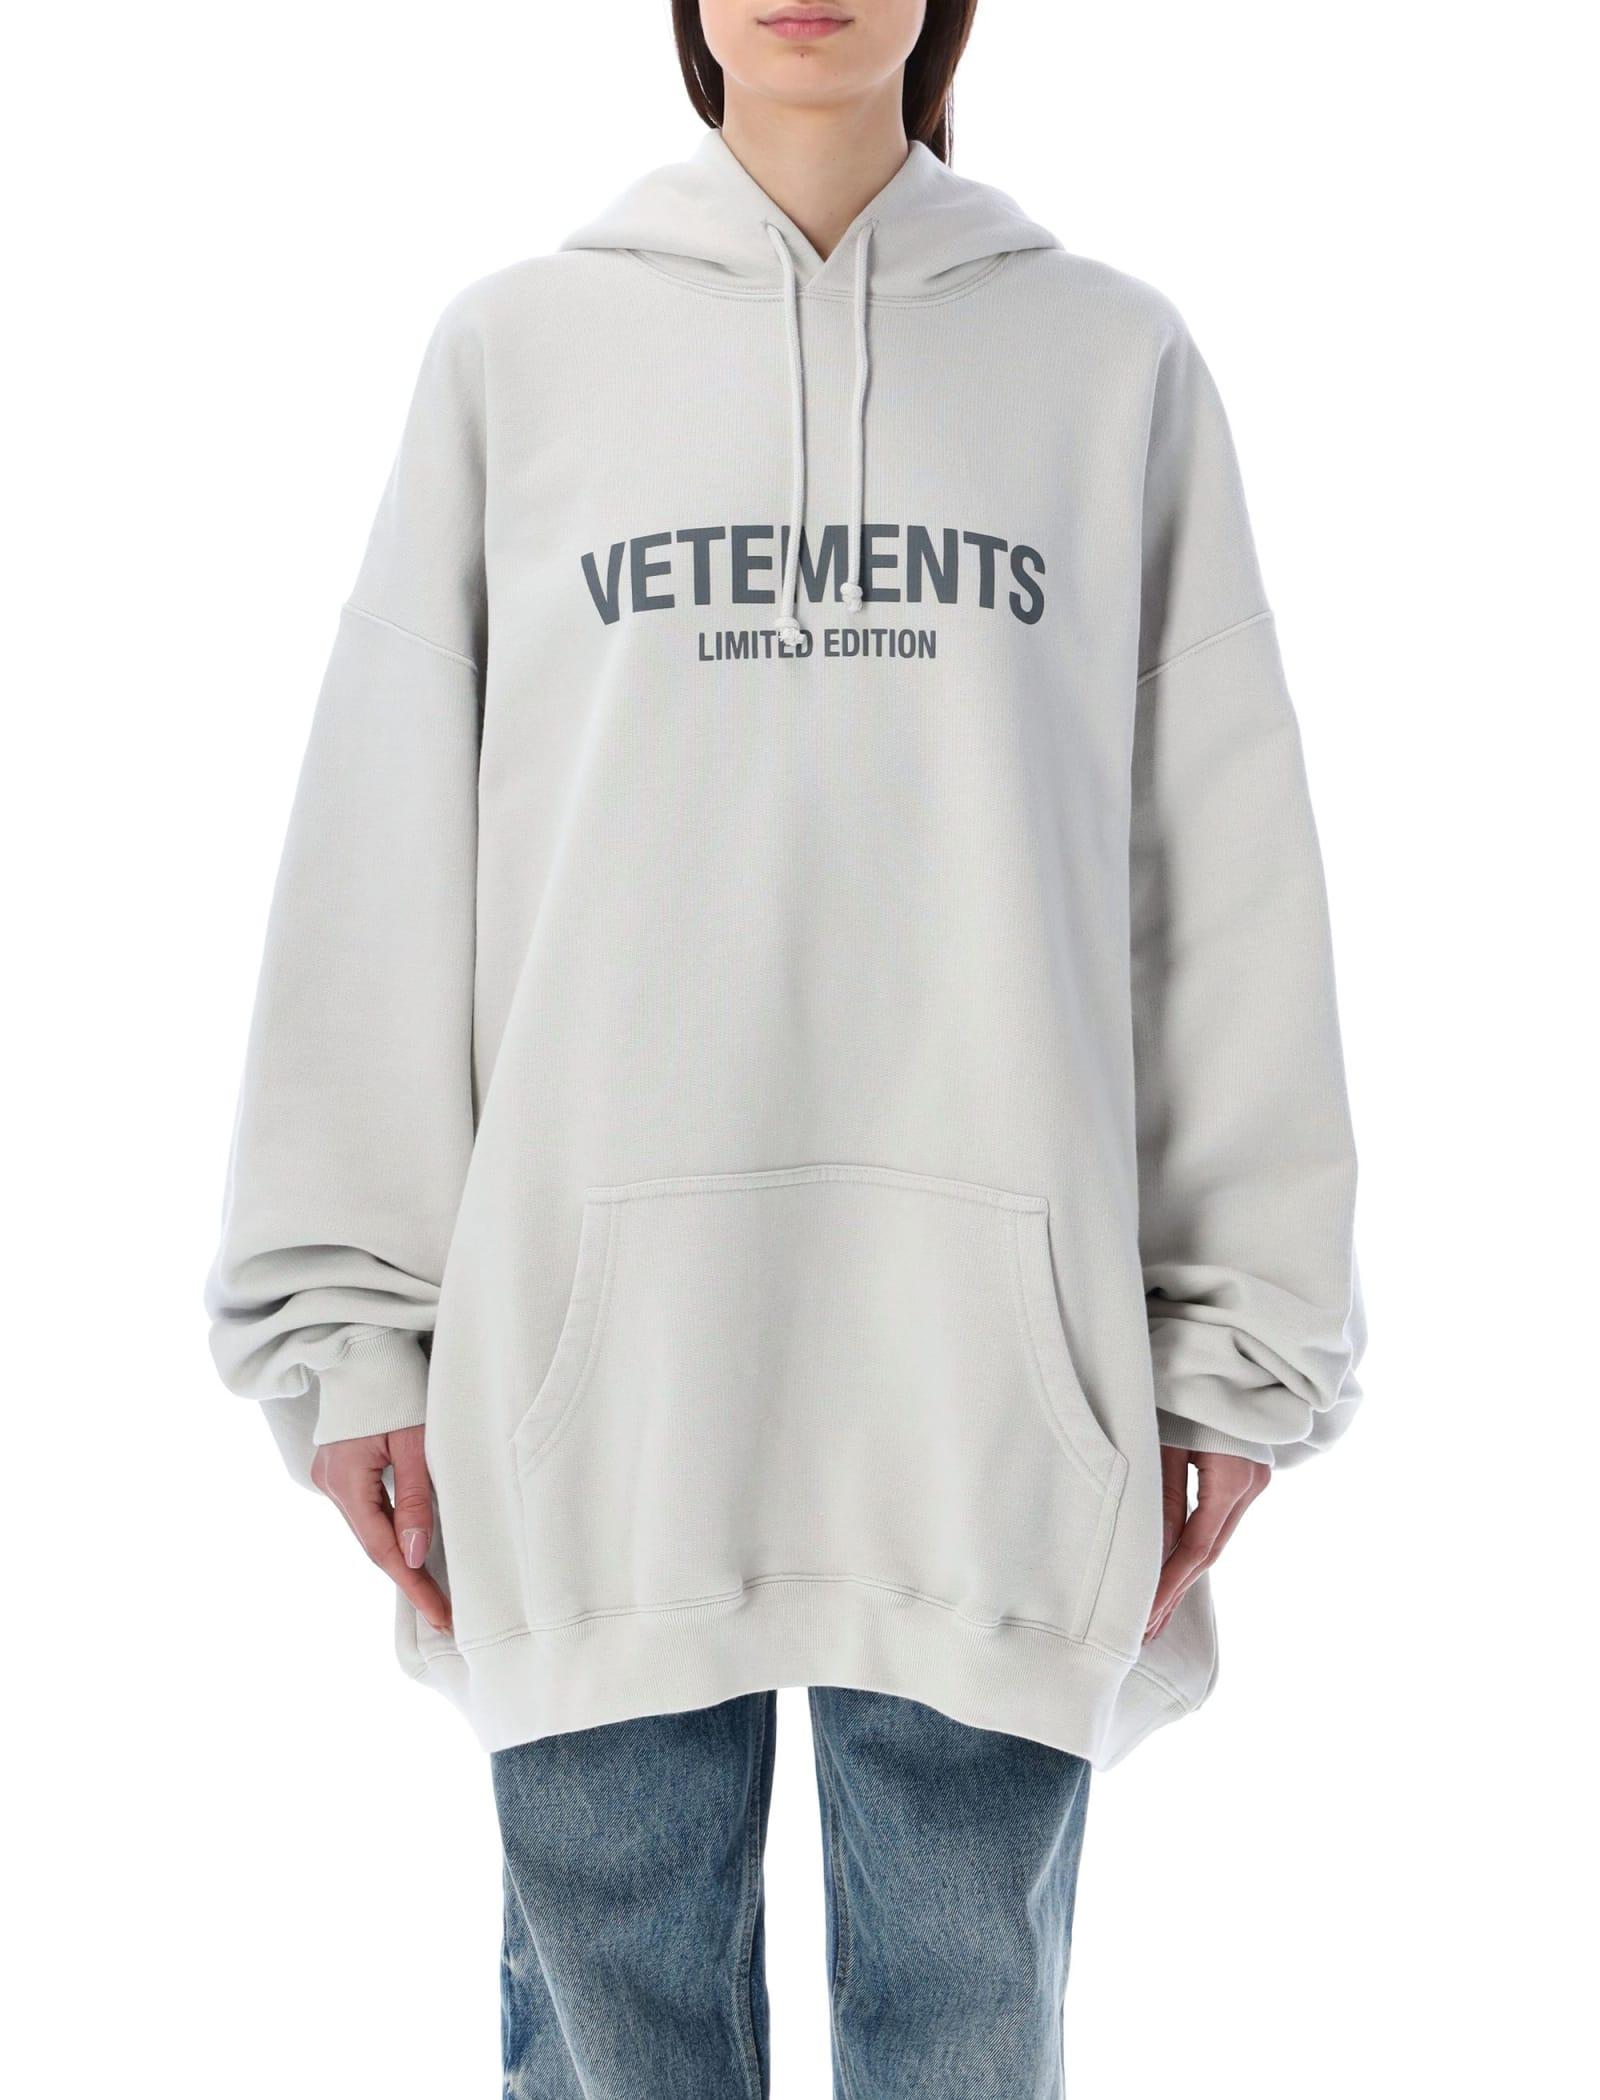 Vetements Logo Limited Edition Hoodie in Gray | Lyst